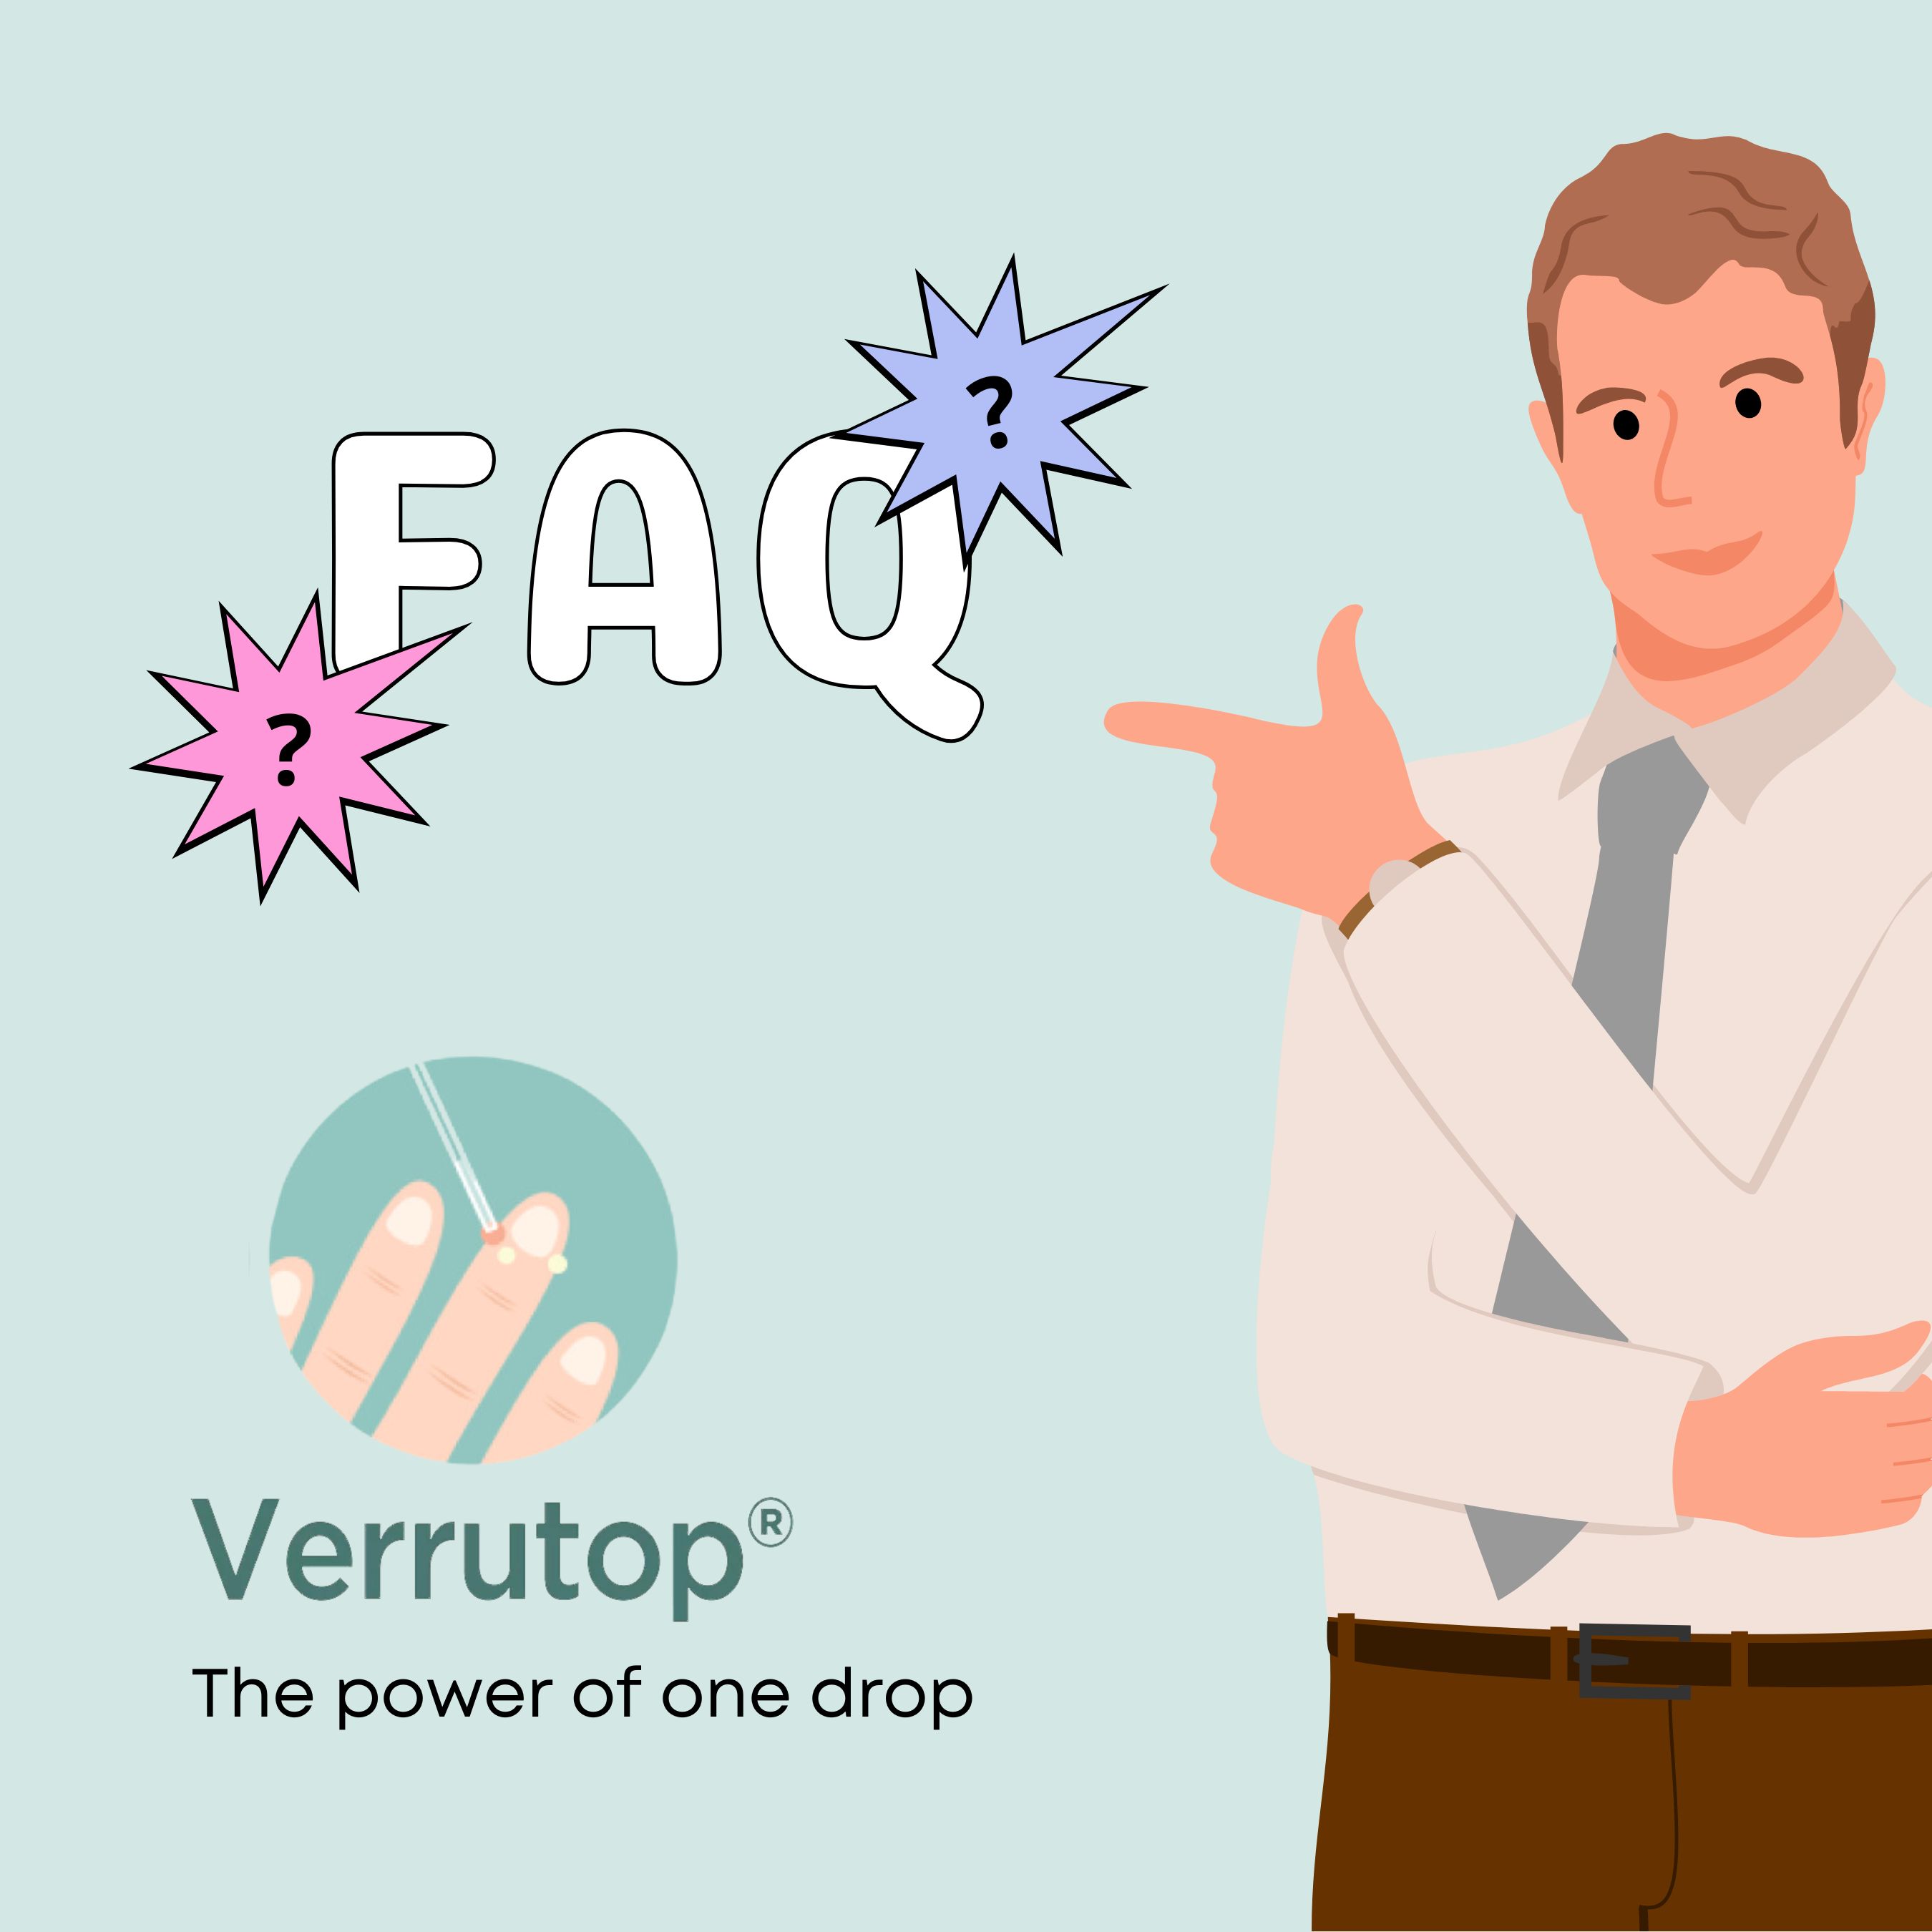 Verrutop - Frequently Asked Questions